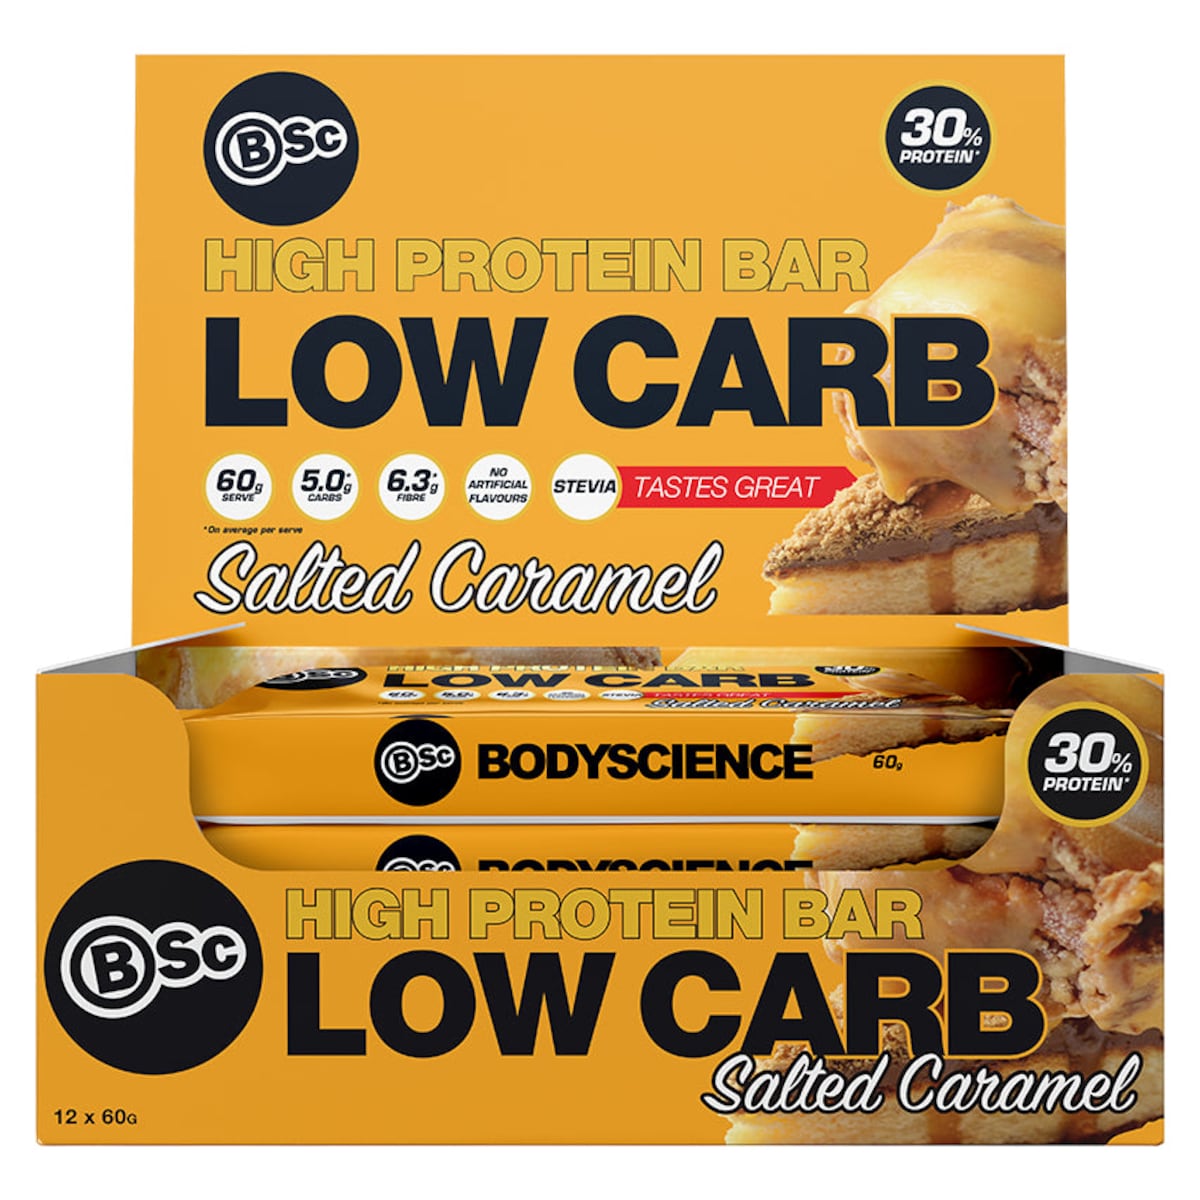 BSc Body Science High Protein Low Carb Bar Salted Caramel 12 x 60g Australia